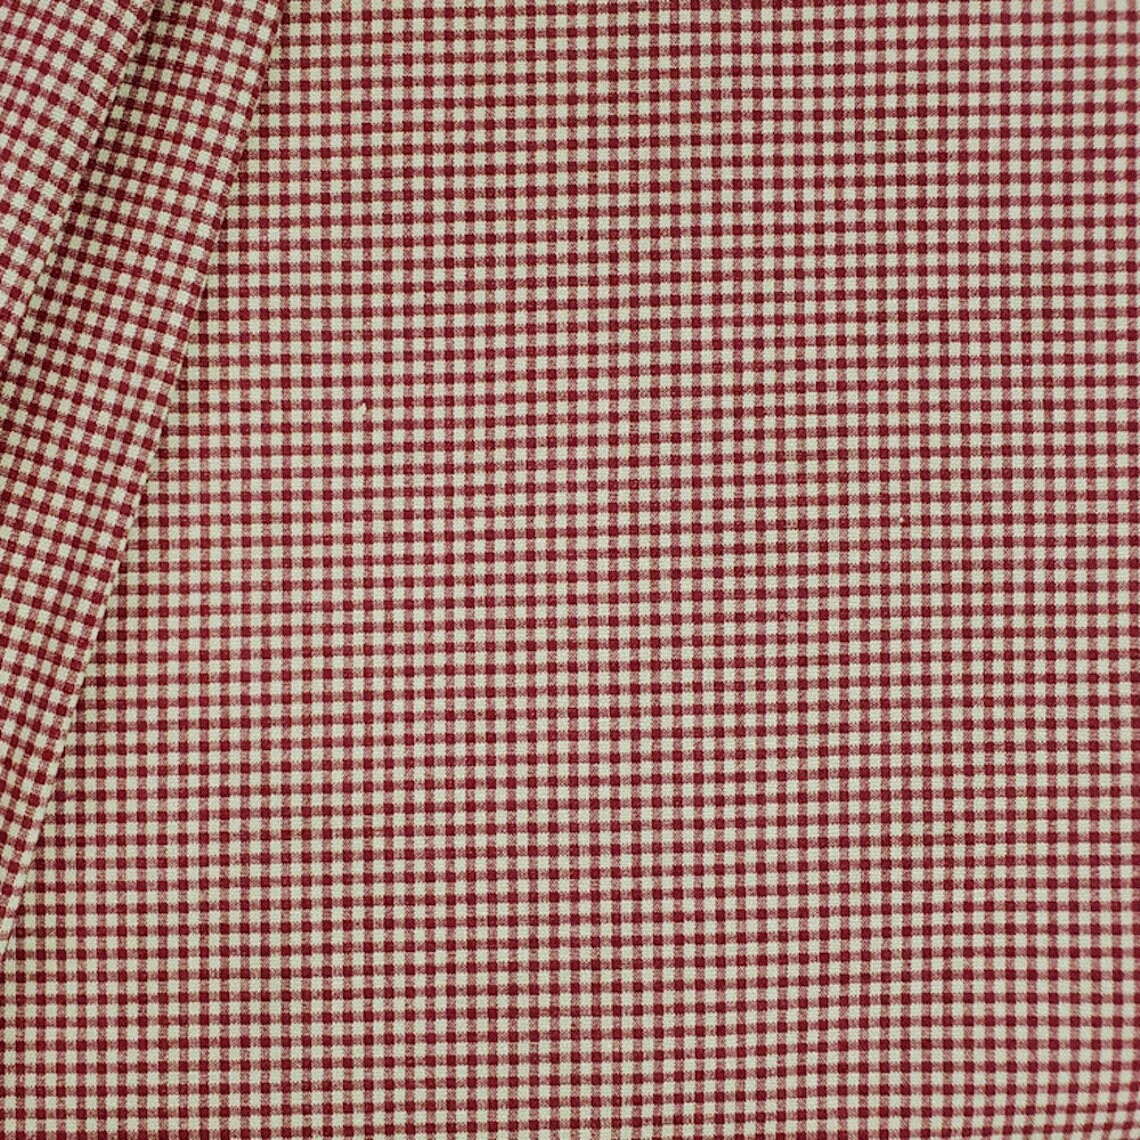 scalloped valance in farmhouse red gingham check on beige